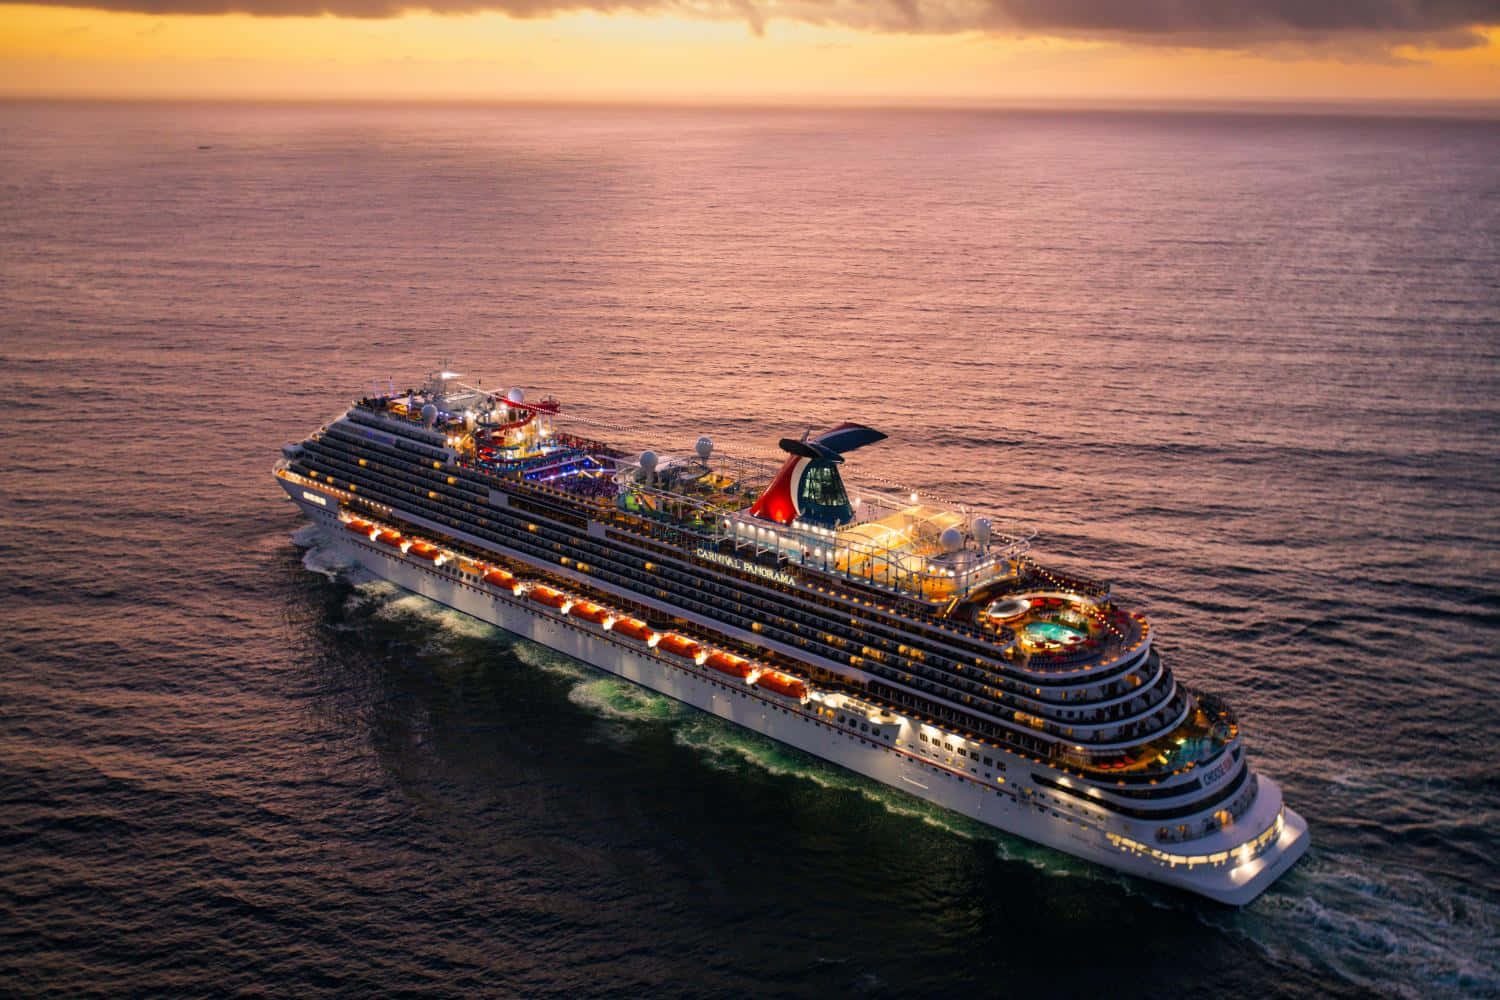 Cruise the Caribbean in Comfort with Carnival Conquest